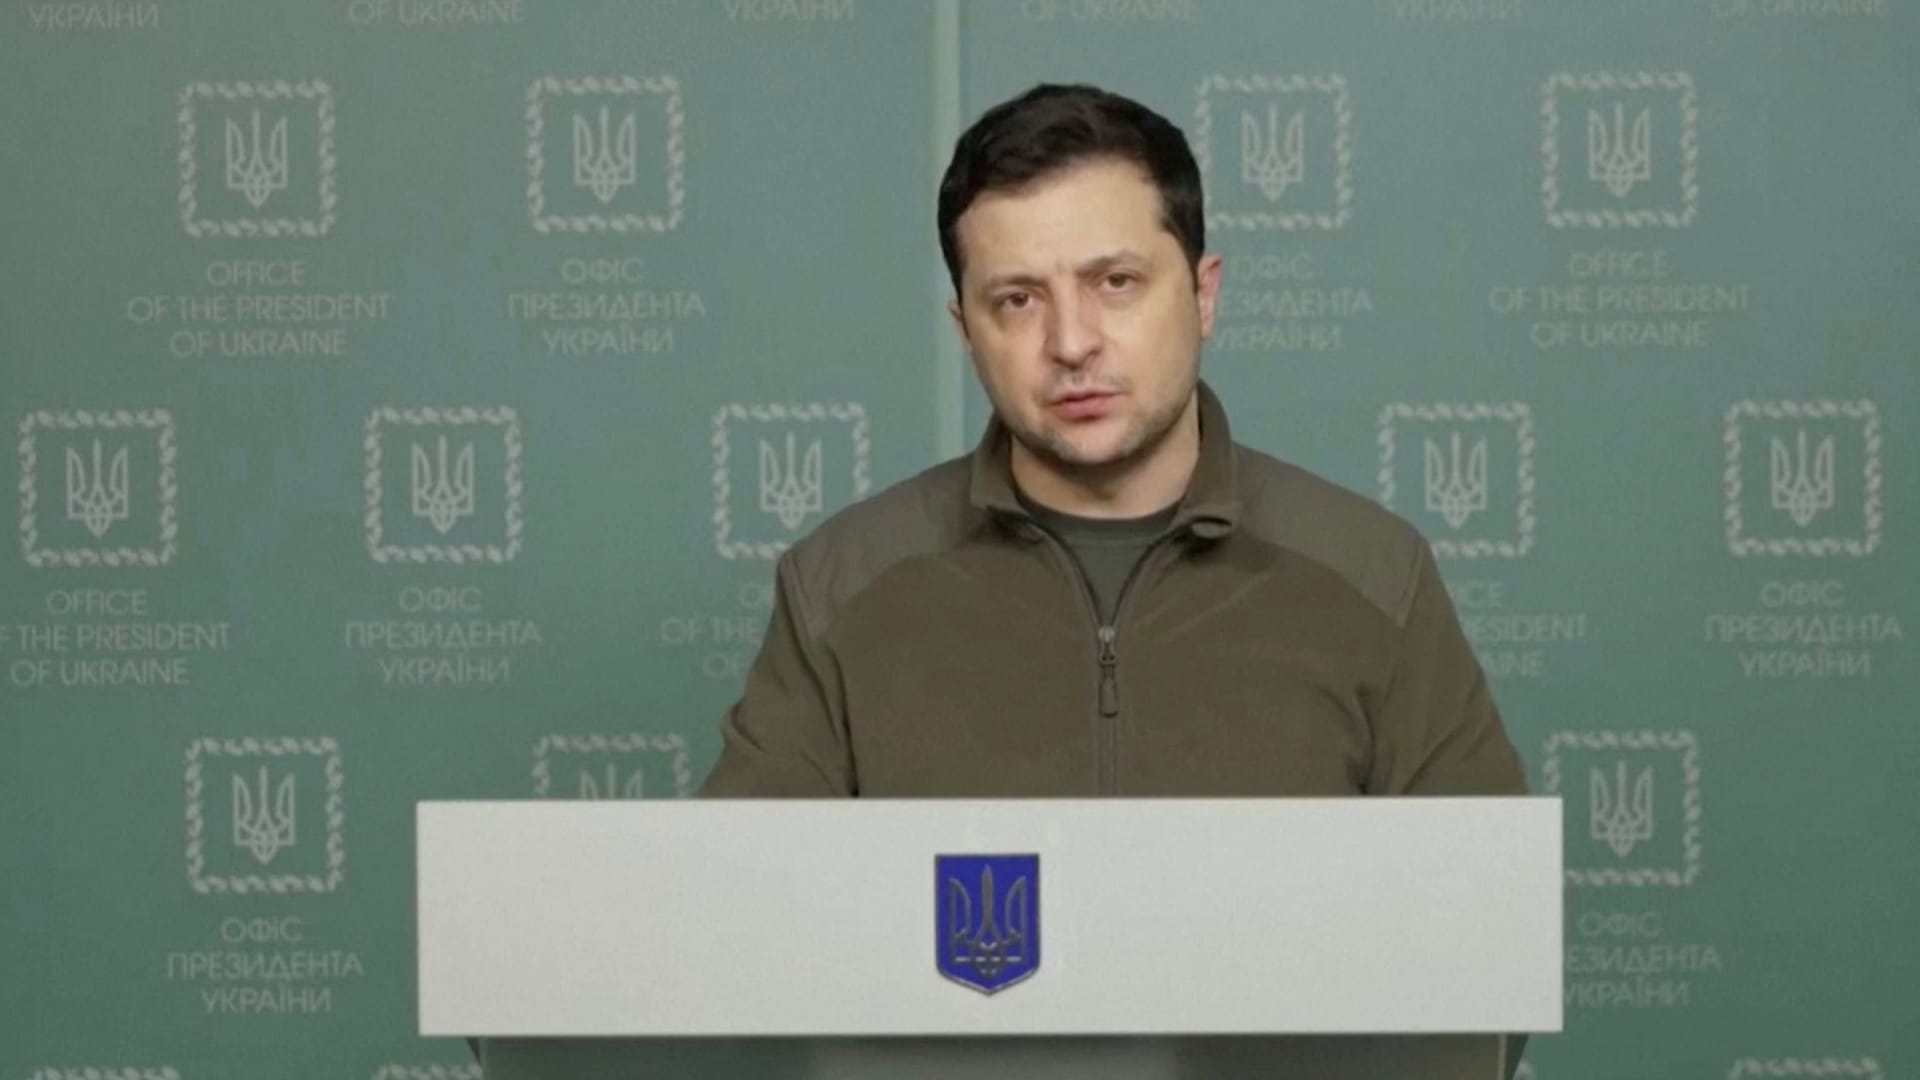 Ukrainian President Volodymyr Zelenskyy speaks about current situation in Kyiv, in Ukraine, February 26, 2022, in this still image taken from a handout video.